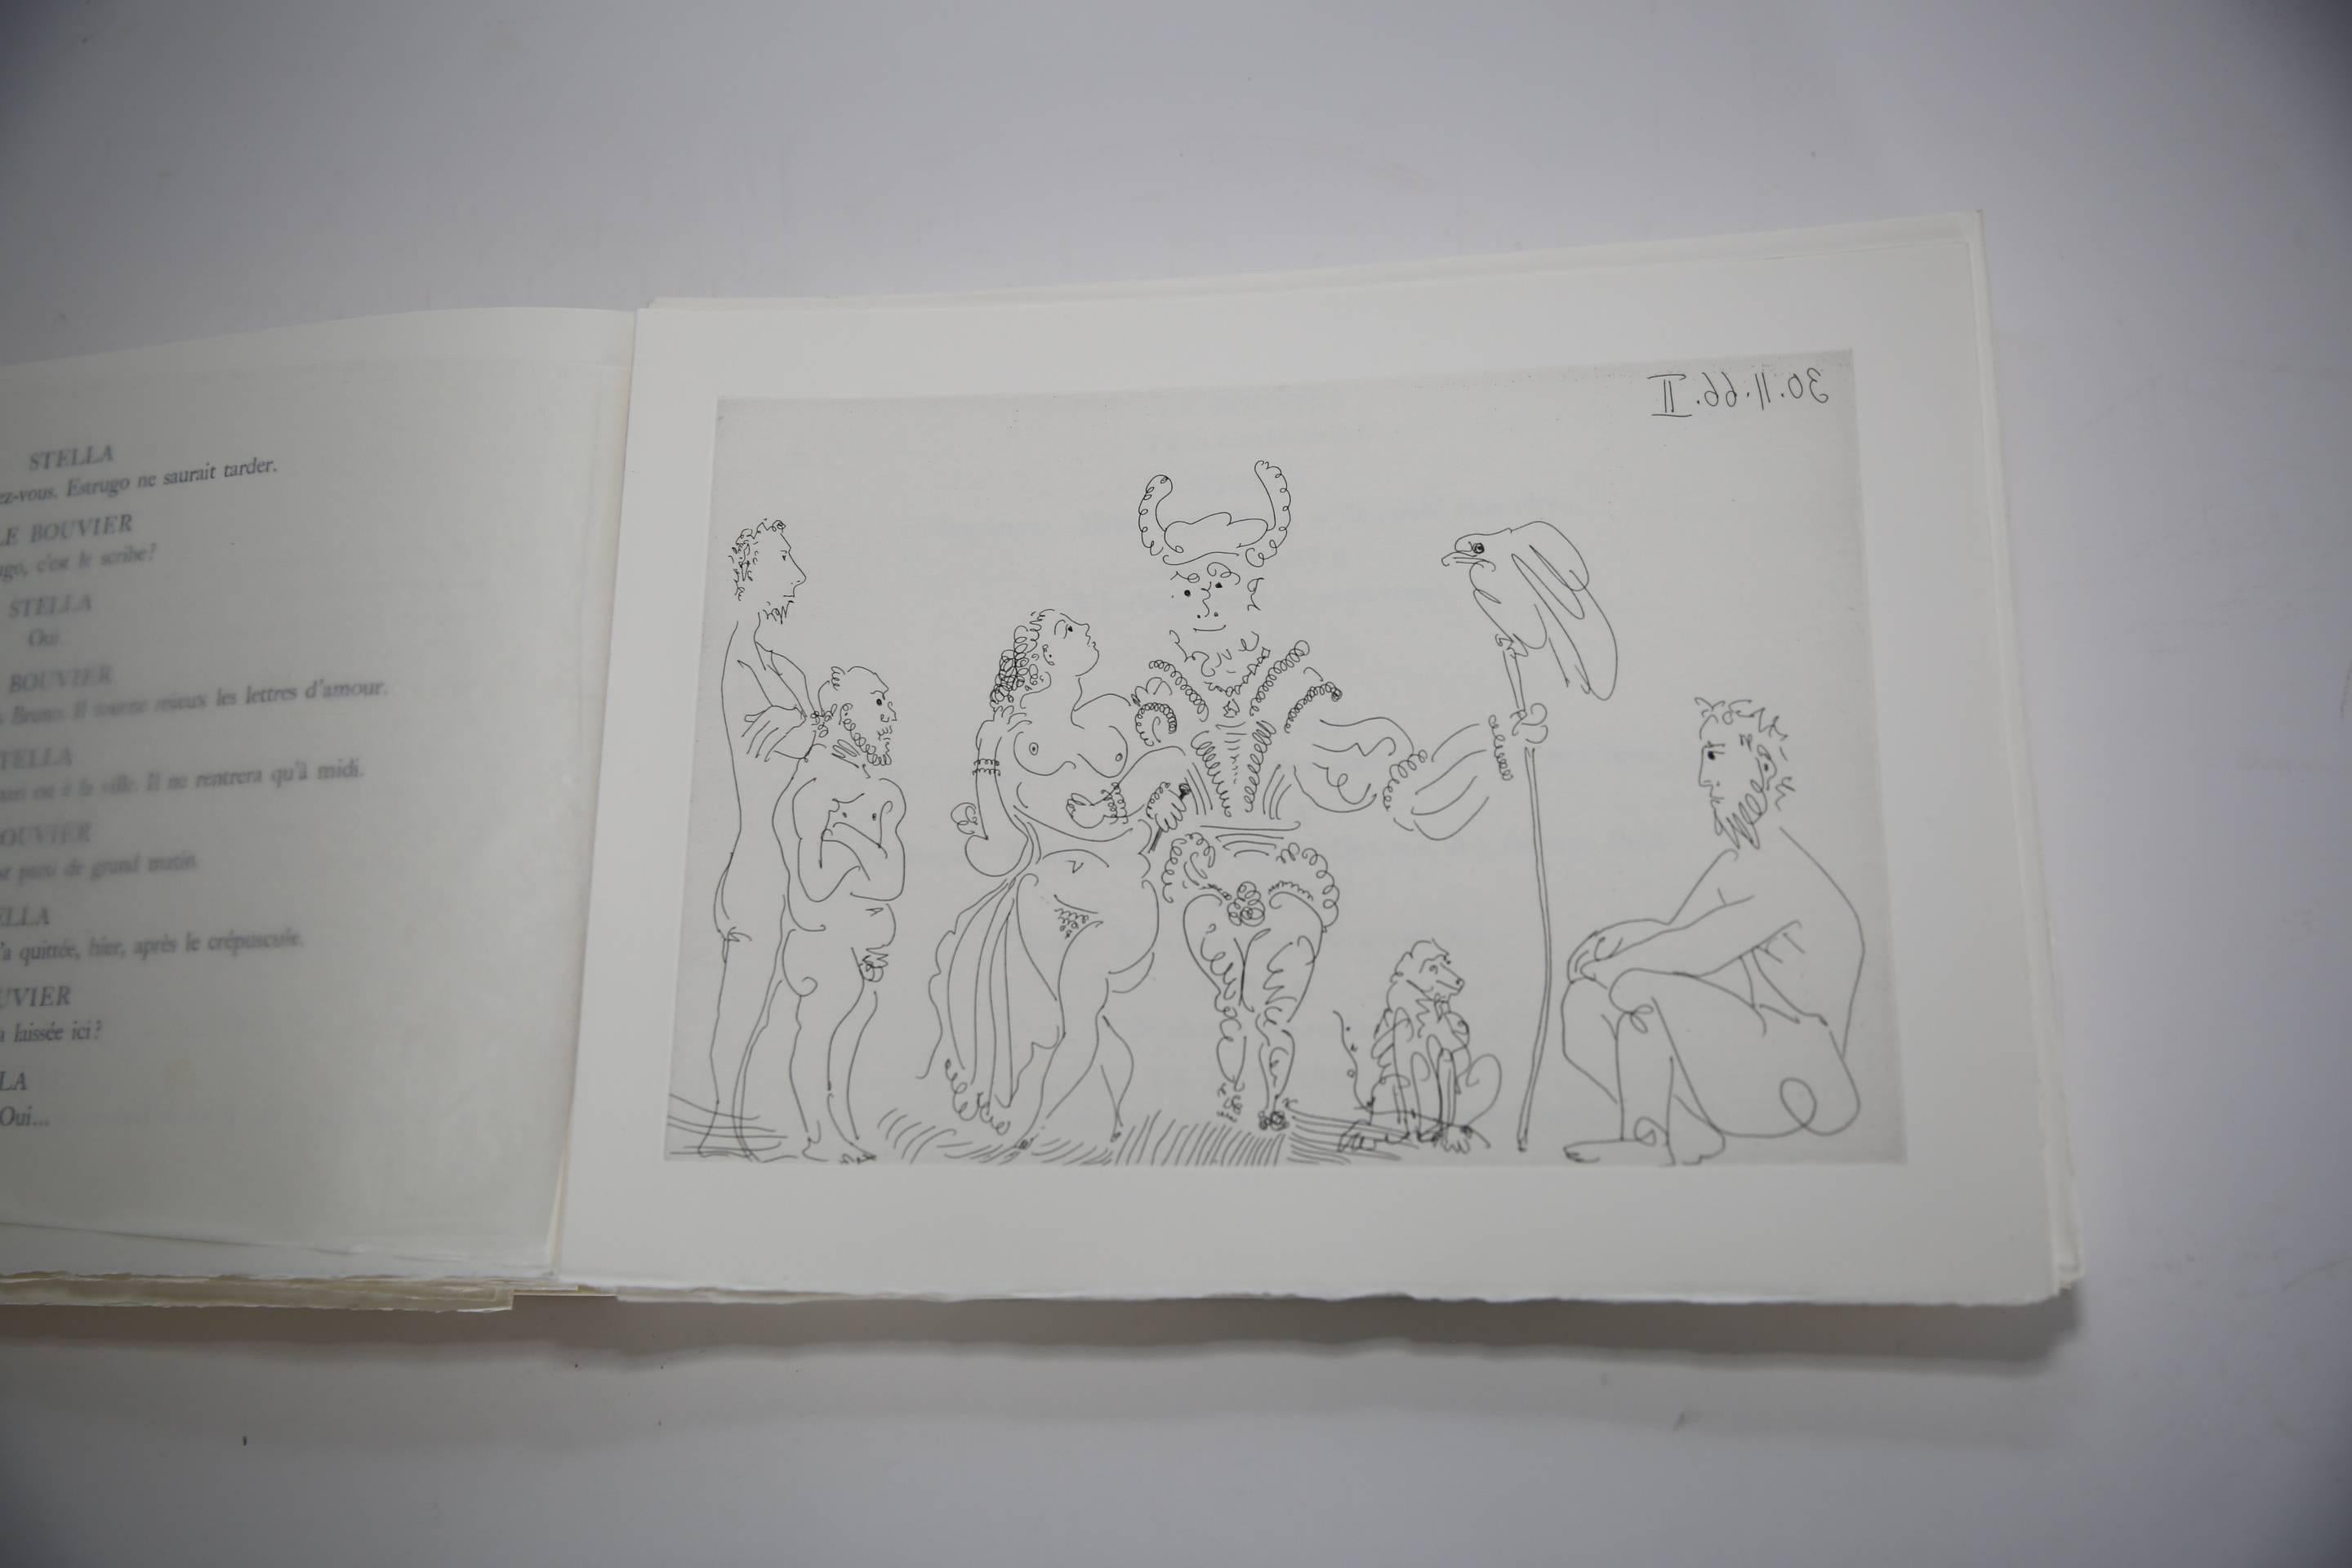 Le Cocu Magnifique -- complete illustrated book with 12 original etchings For Sale 8